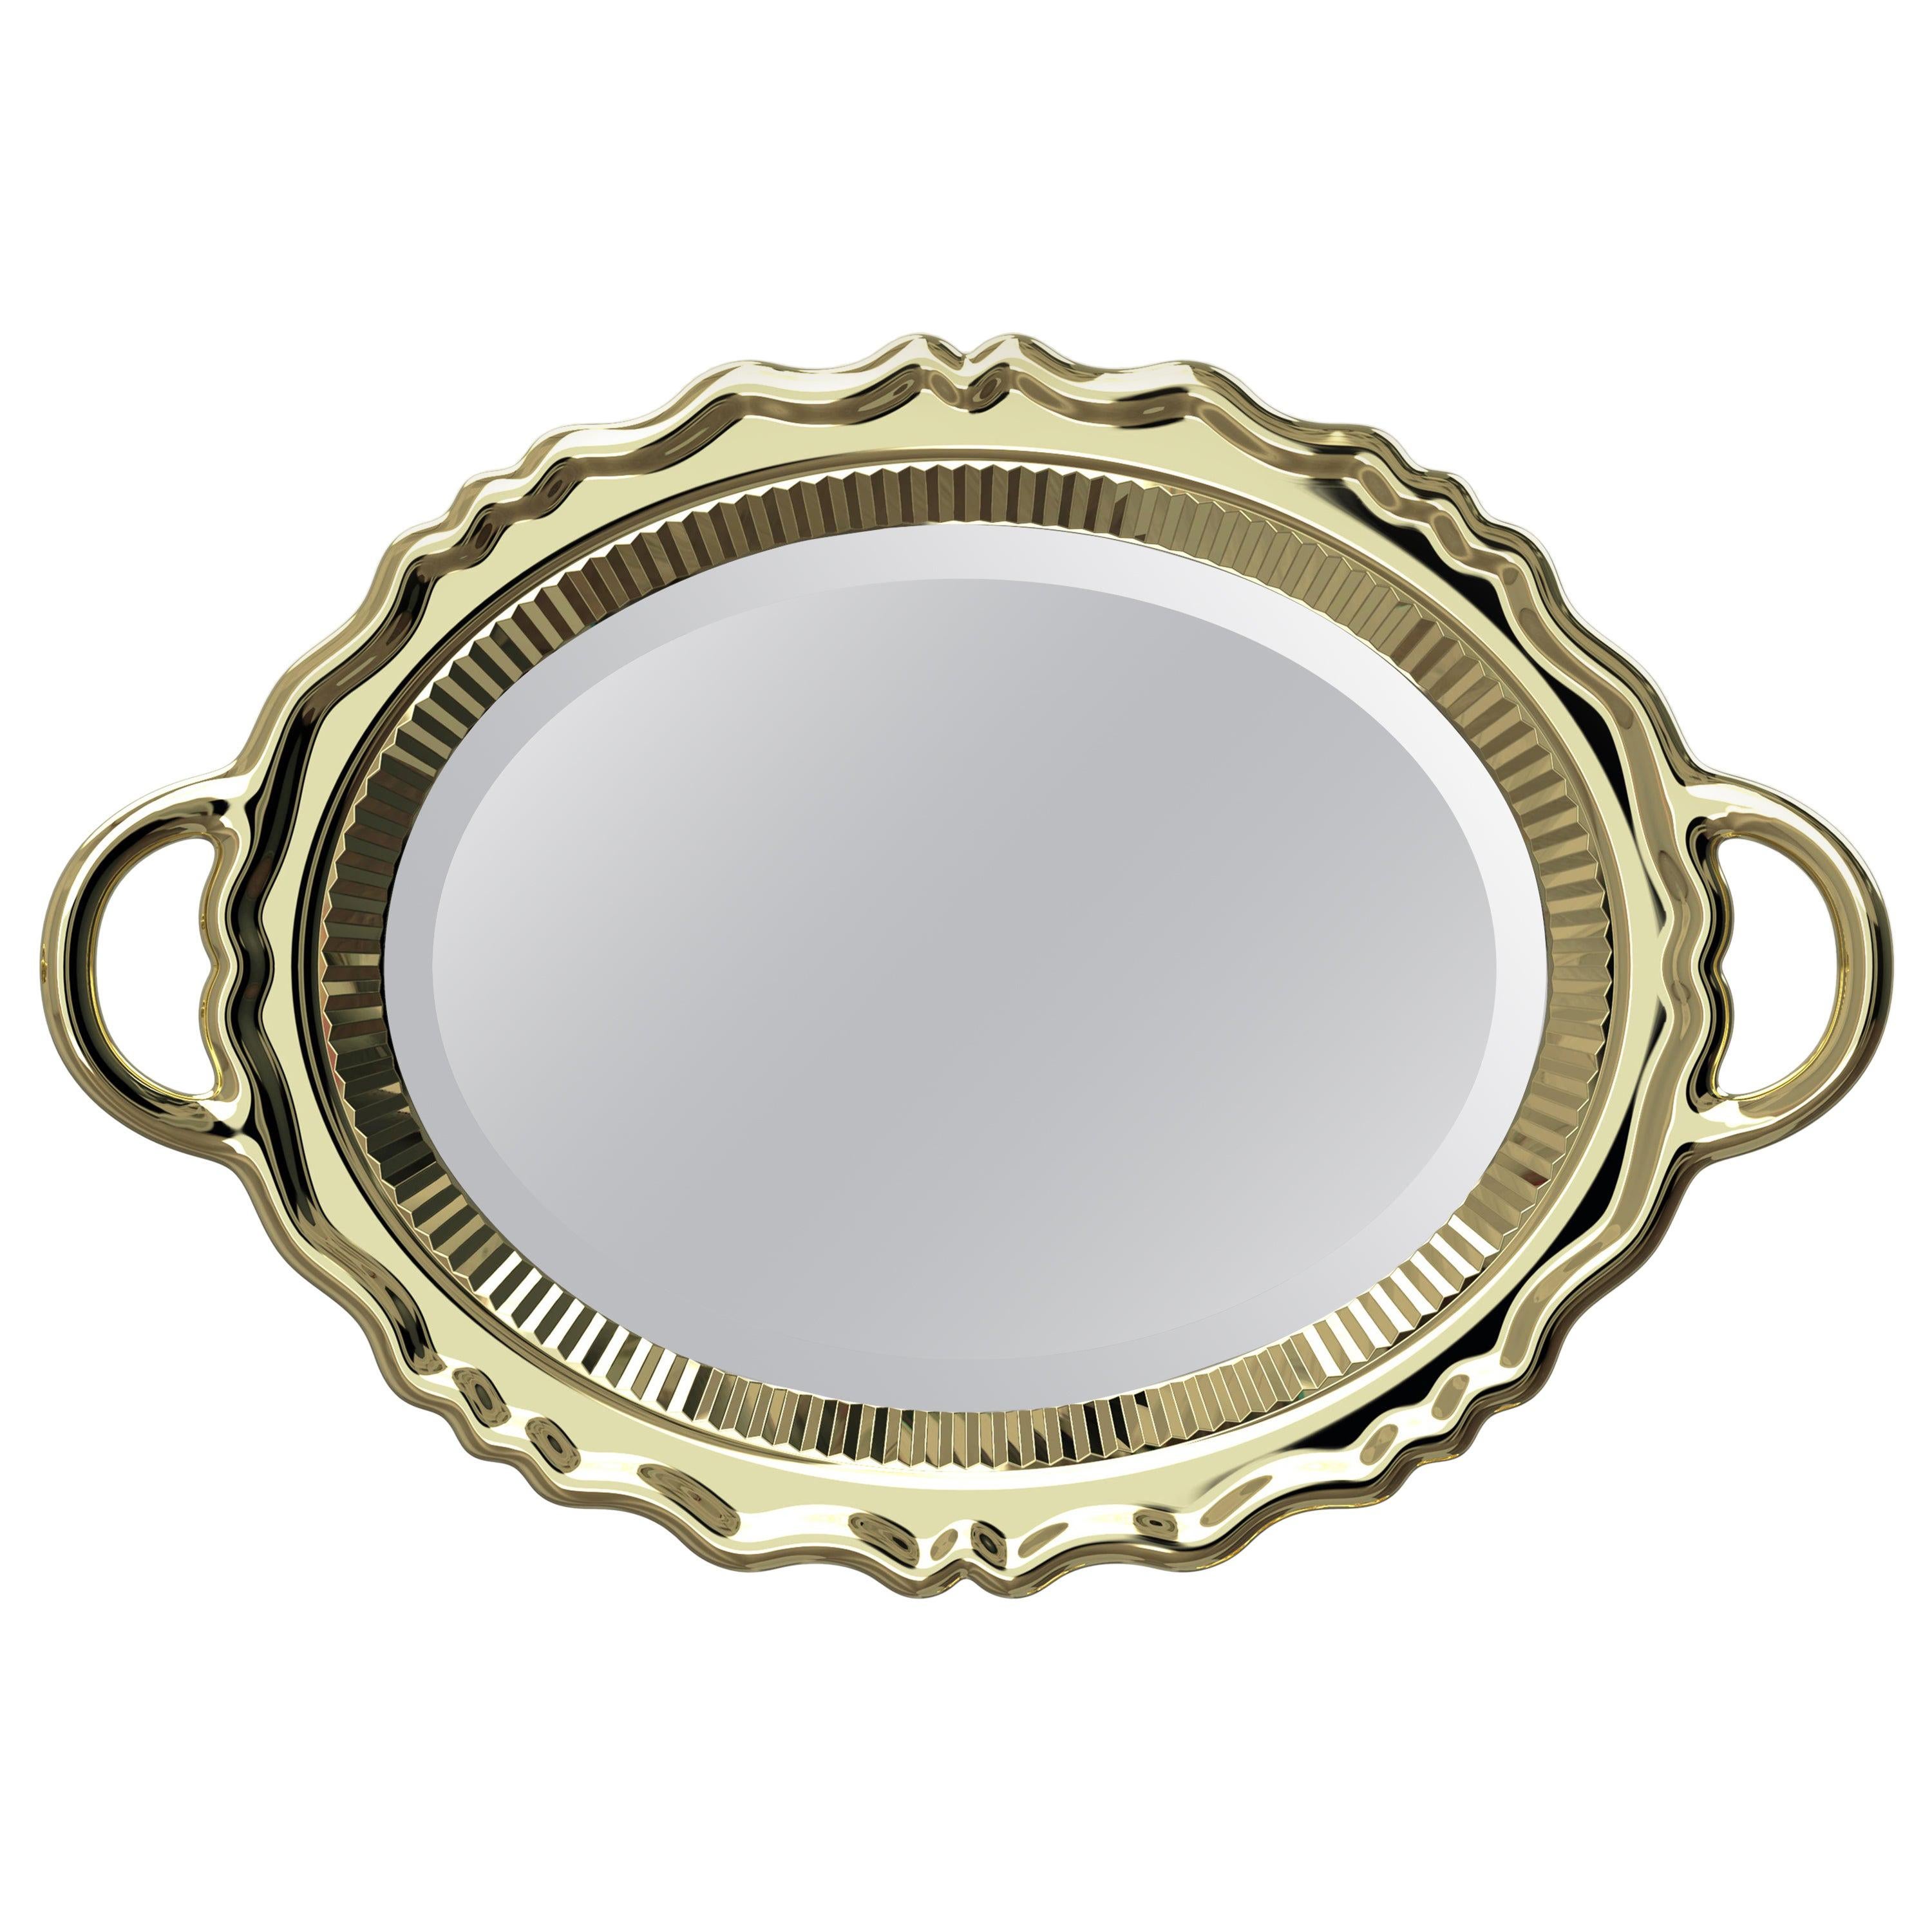 Modern 17th Century Inspired Gold or Silver Wall Mirror by Studio Job